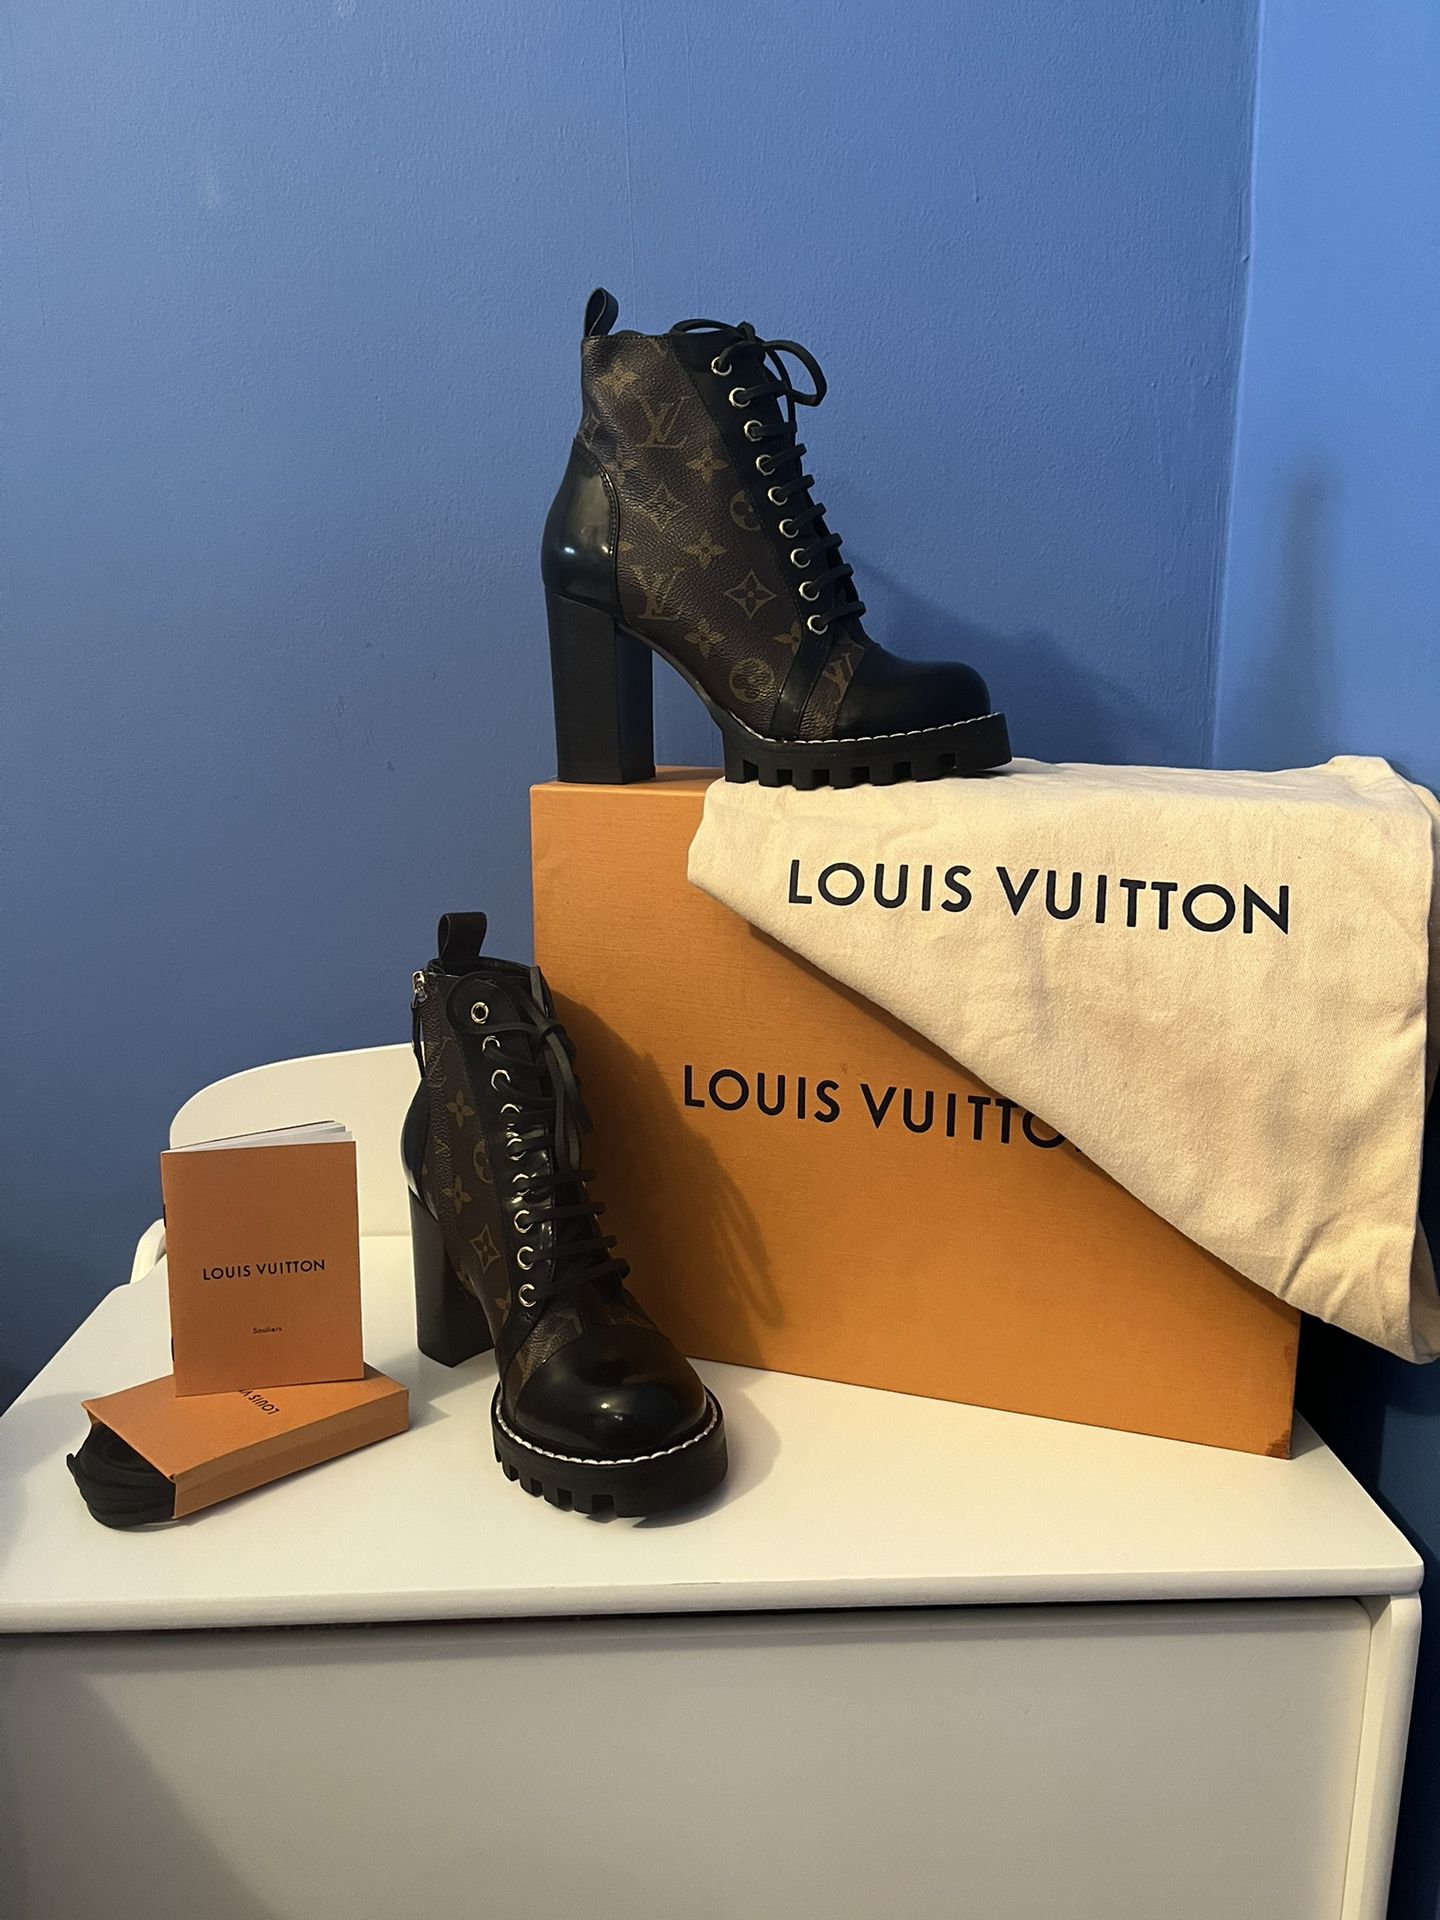 LOUIS VUITTON STAR TRAIL ANKLE BOOT for Sale in Hamilton, OH - OfferUp